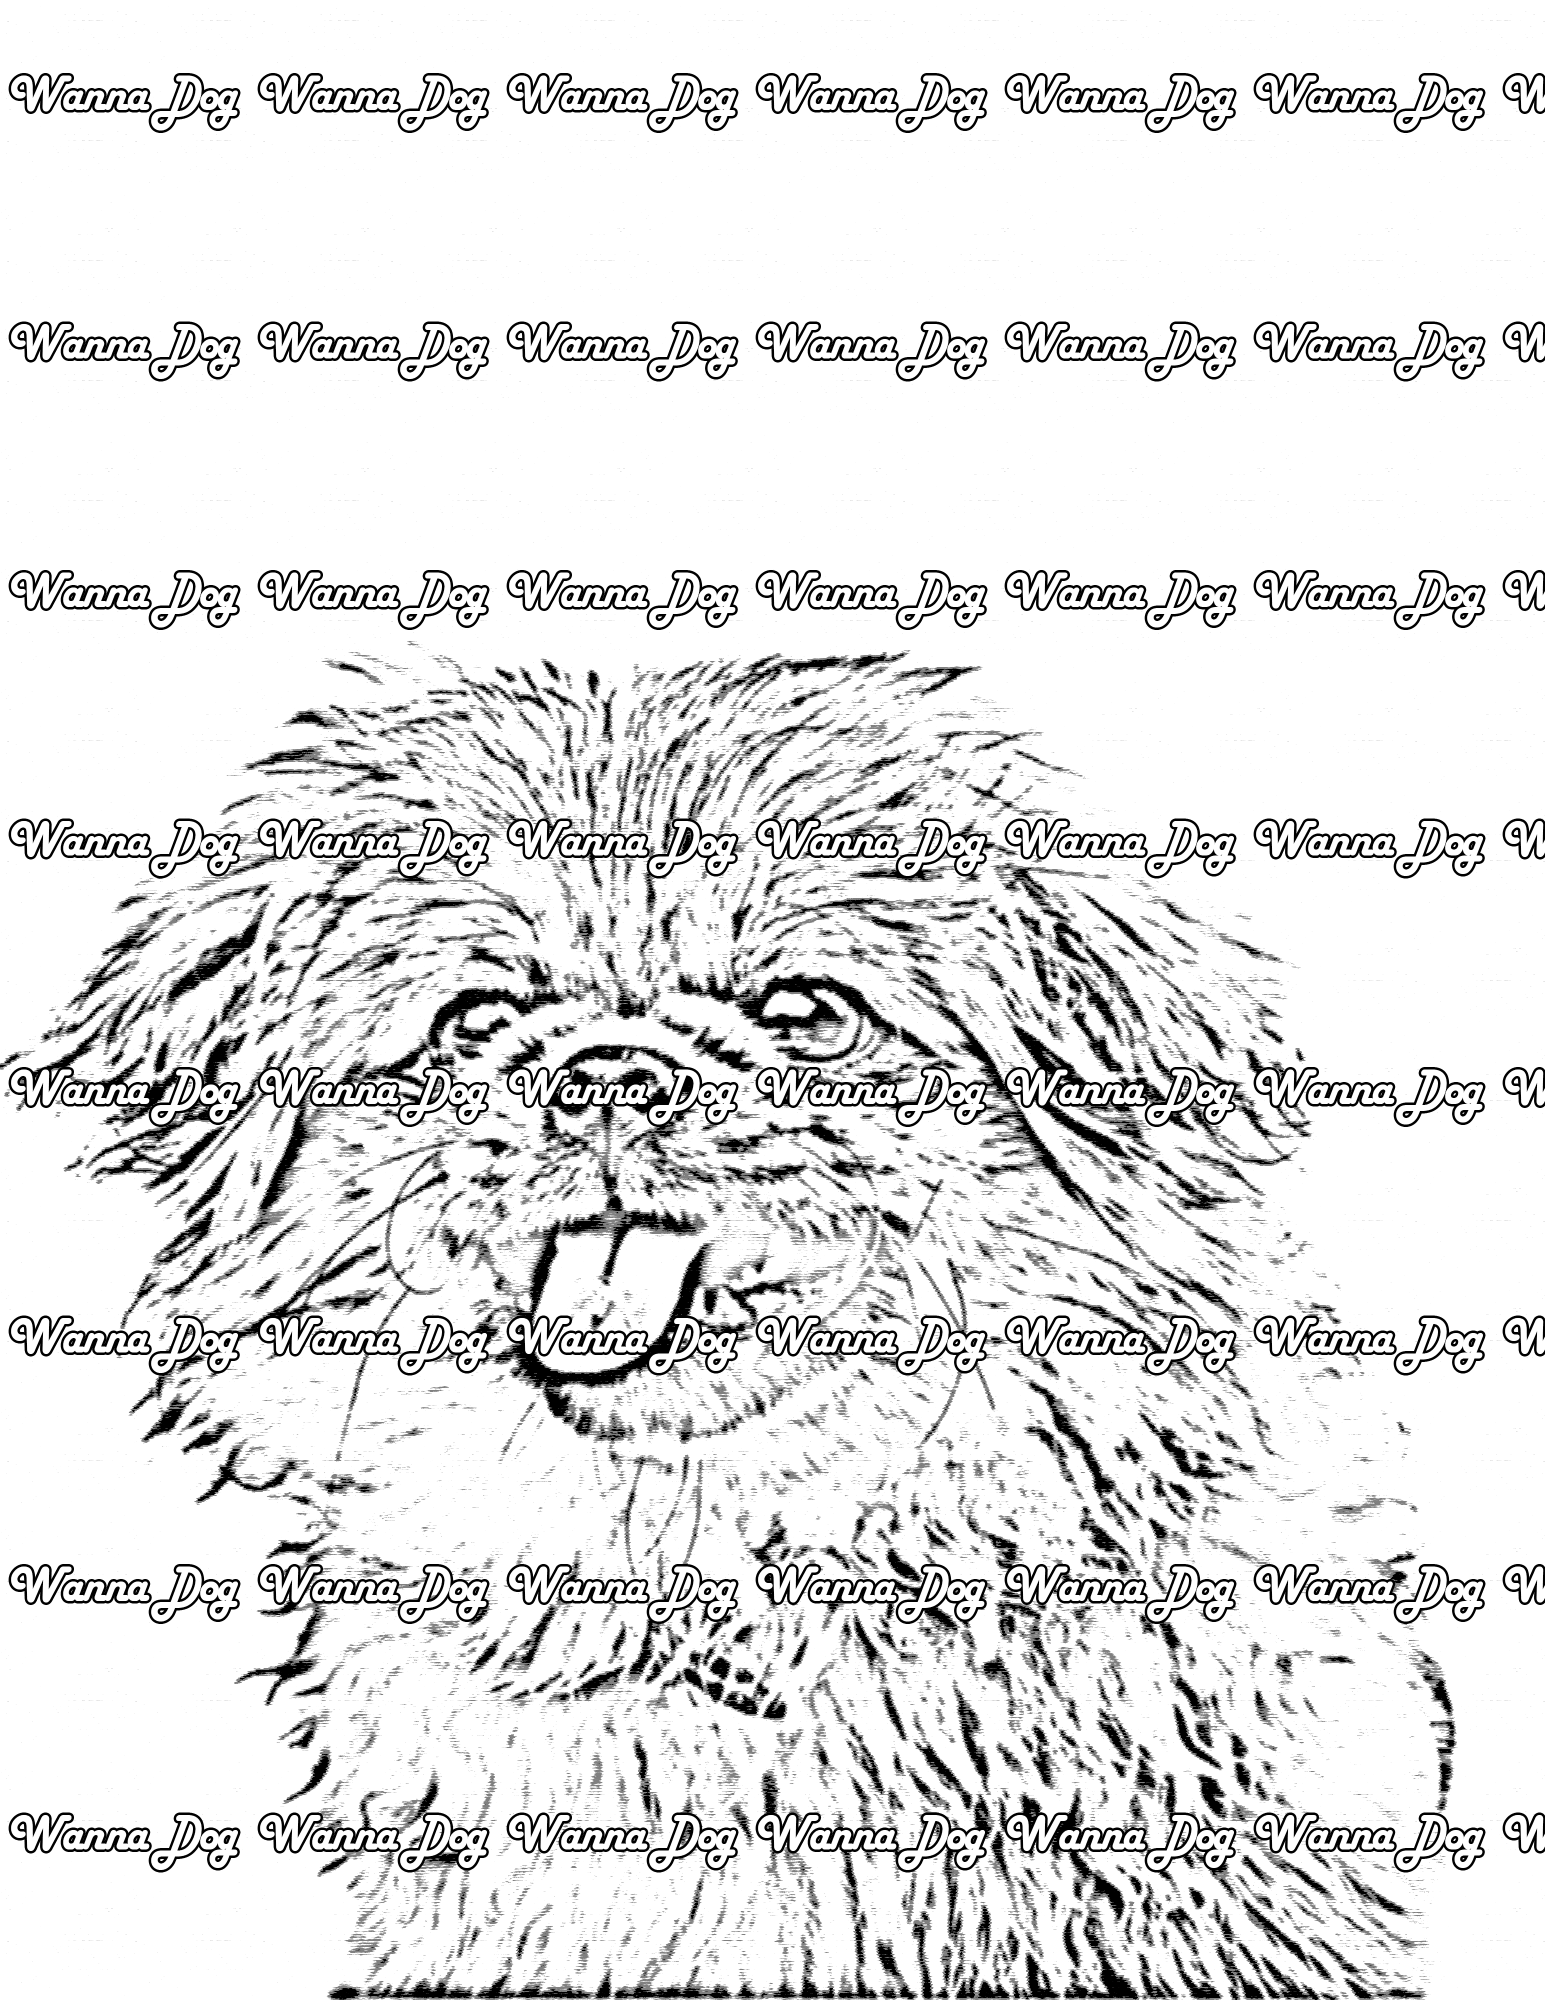 Pekingese Coloring Page of a Pekingese close up with their tongue out